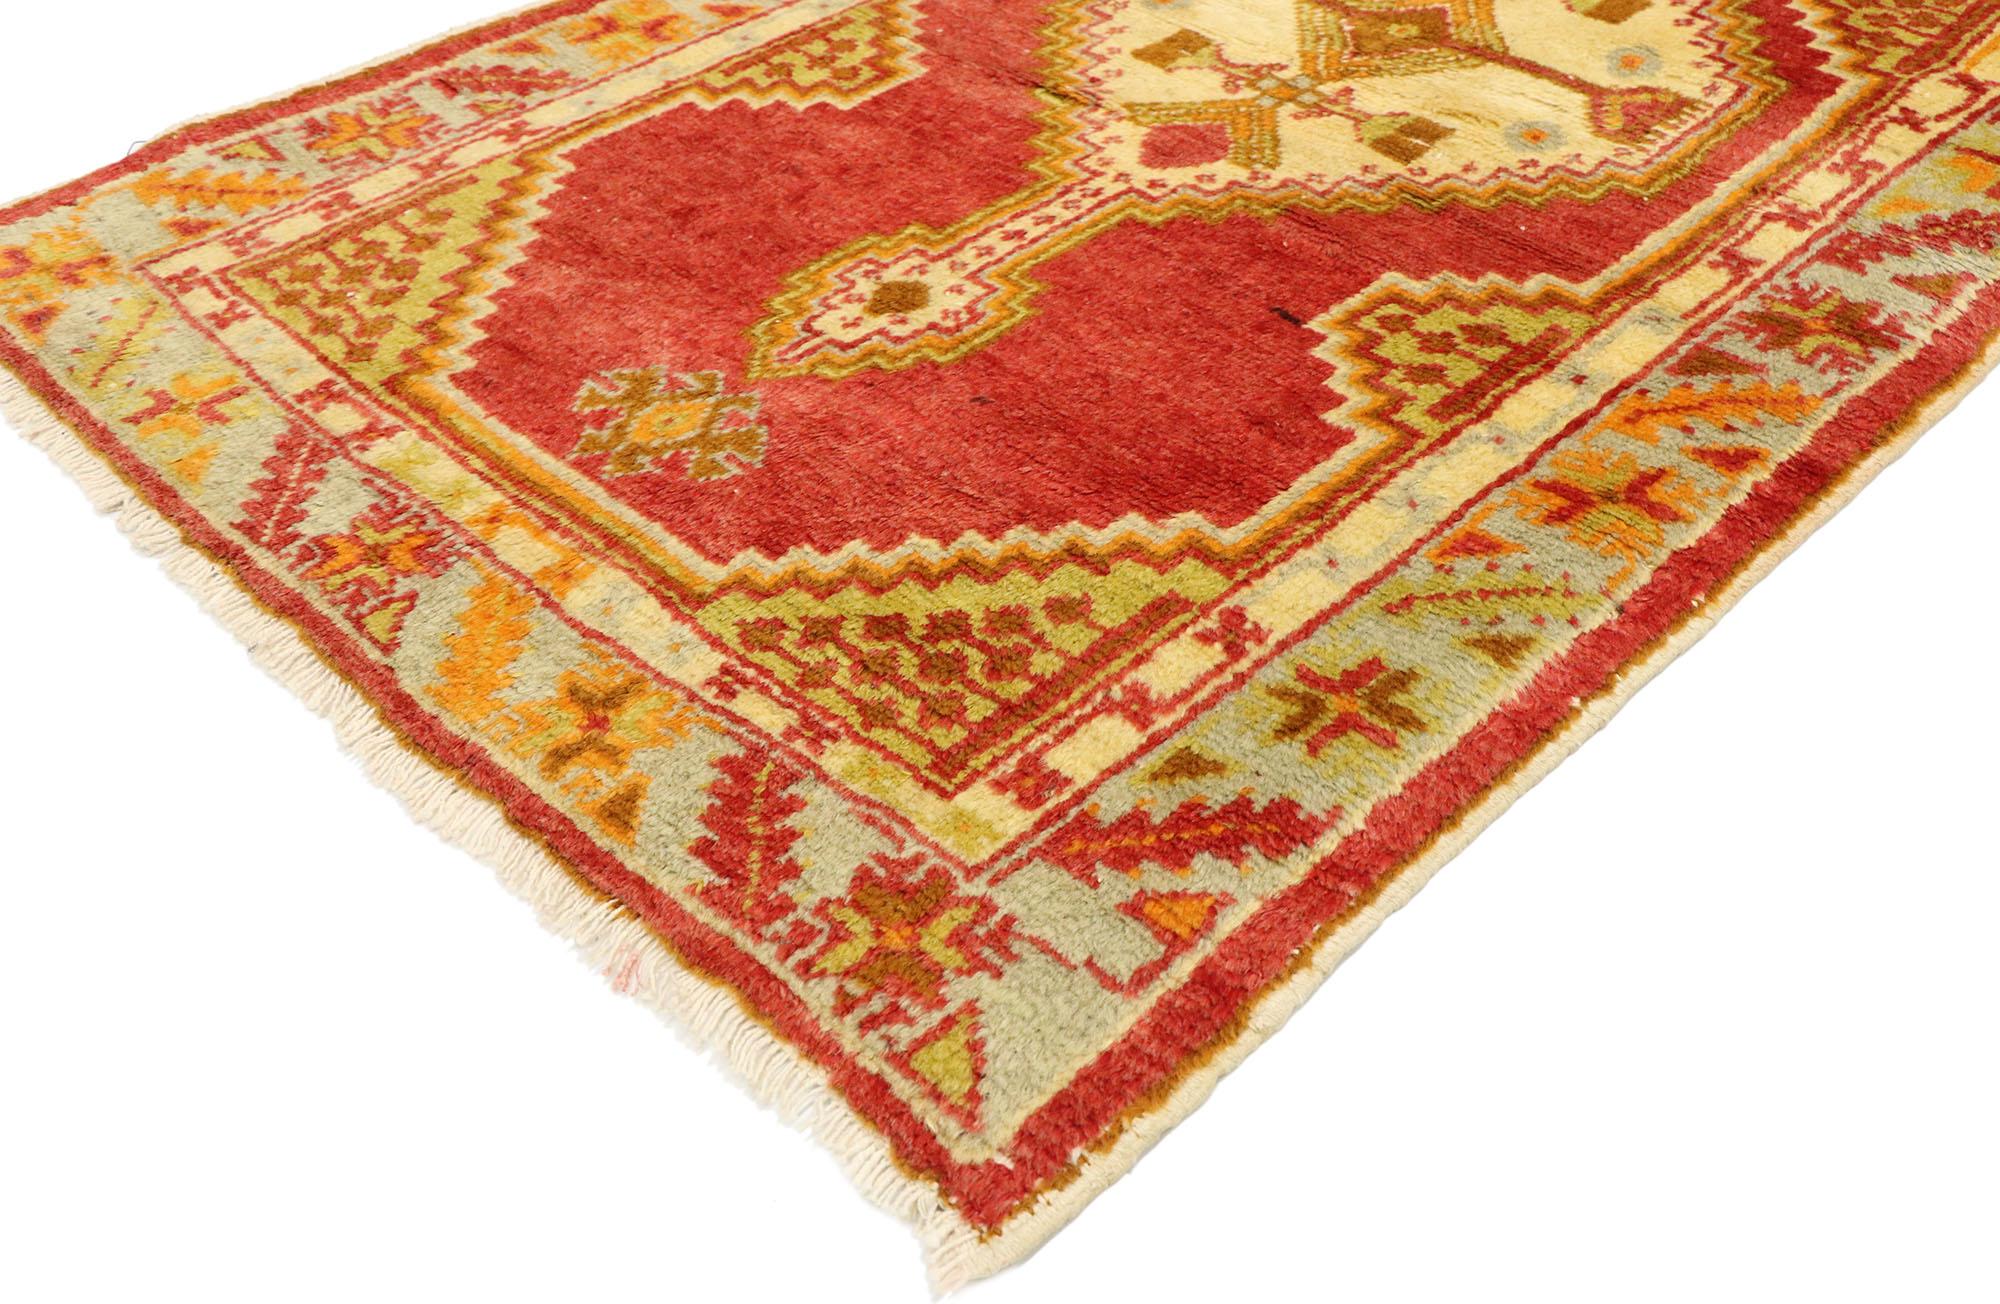 51120, vintage Turkish Oushak Accent rug with Modern Northwestern Tribal style 02'07 x 04'08. This hand knotted wool vintage Turkish Oushak rug features a stepped pole medallion anchored with pendants in an open abrashed red field. Complementary